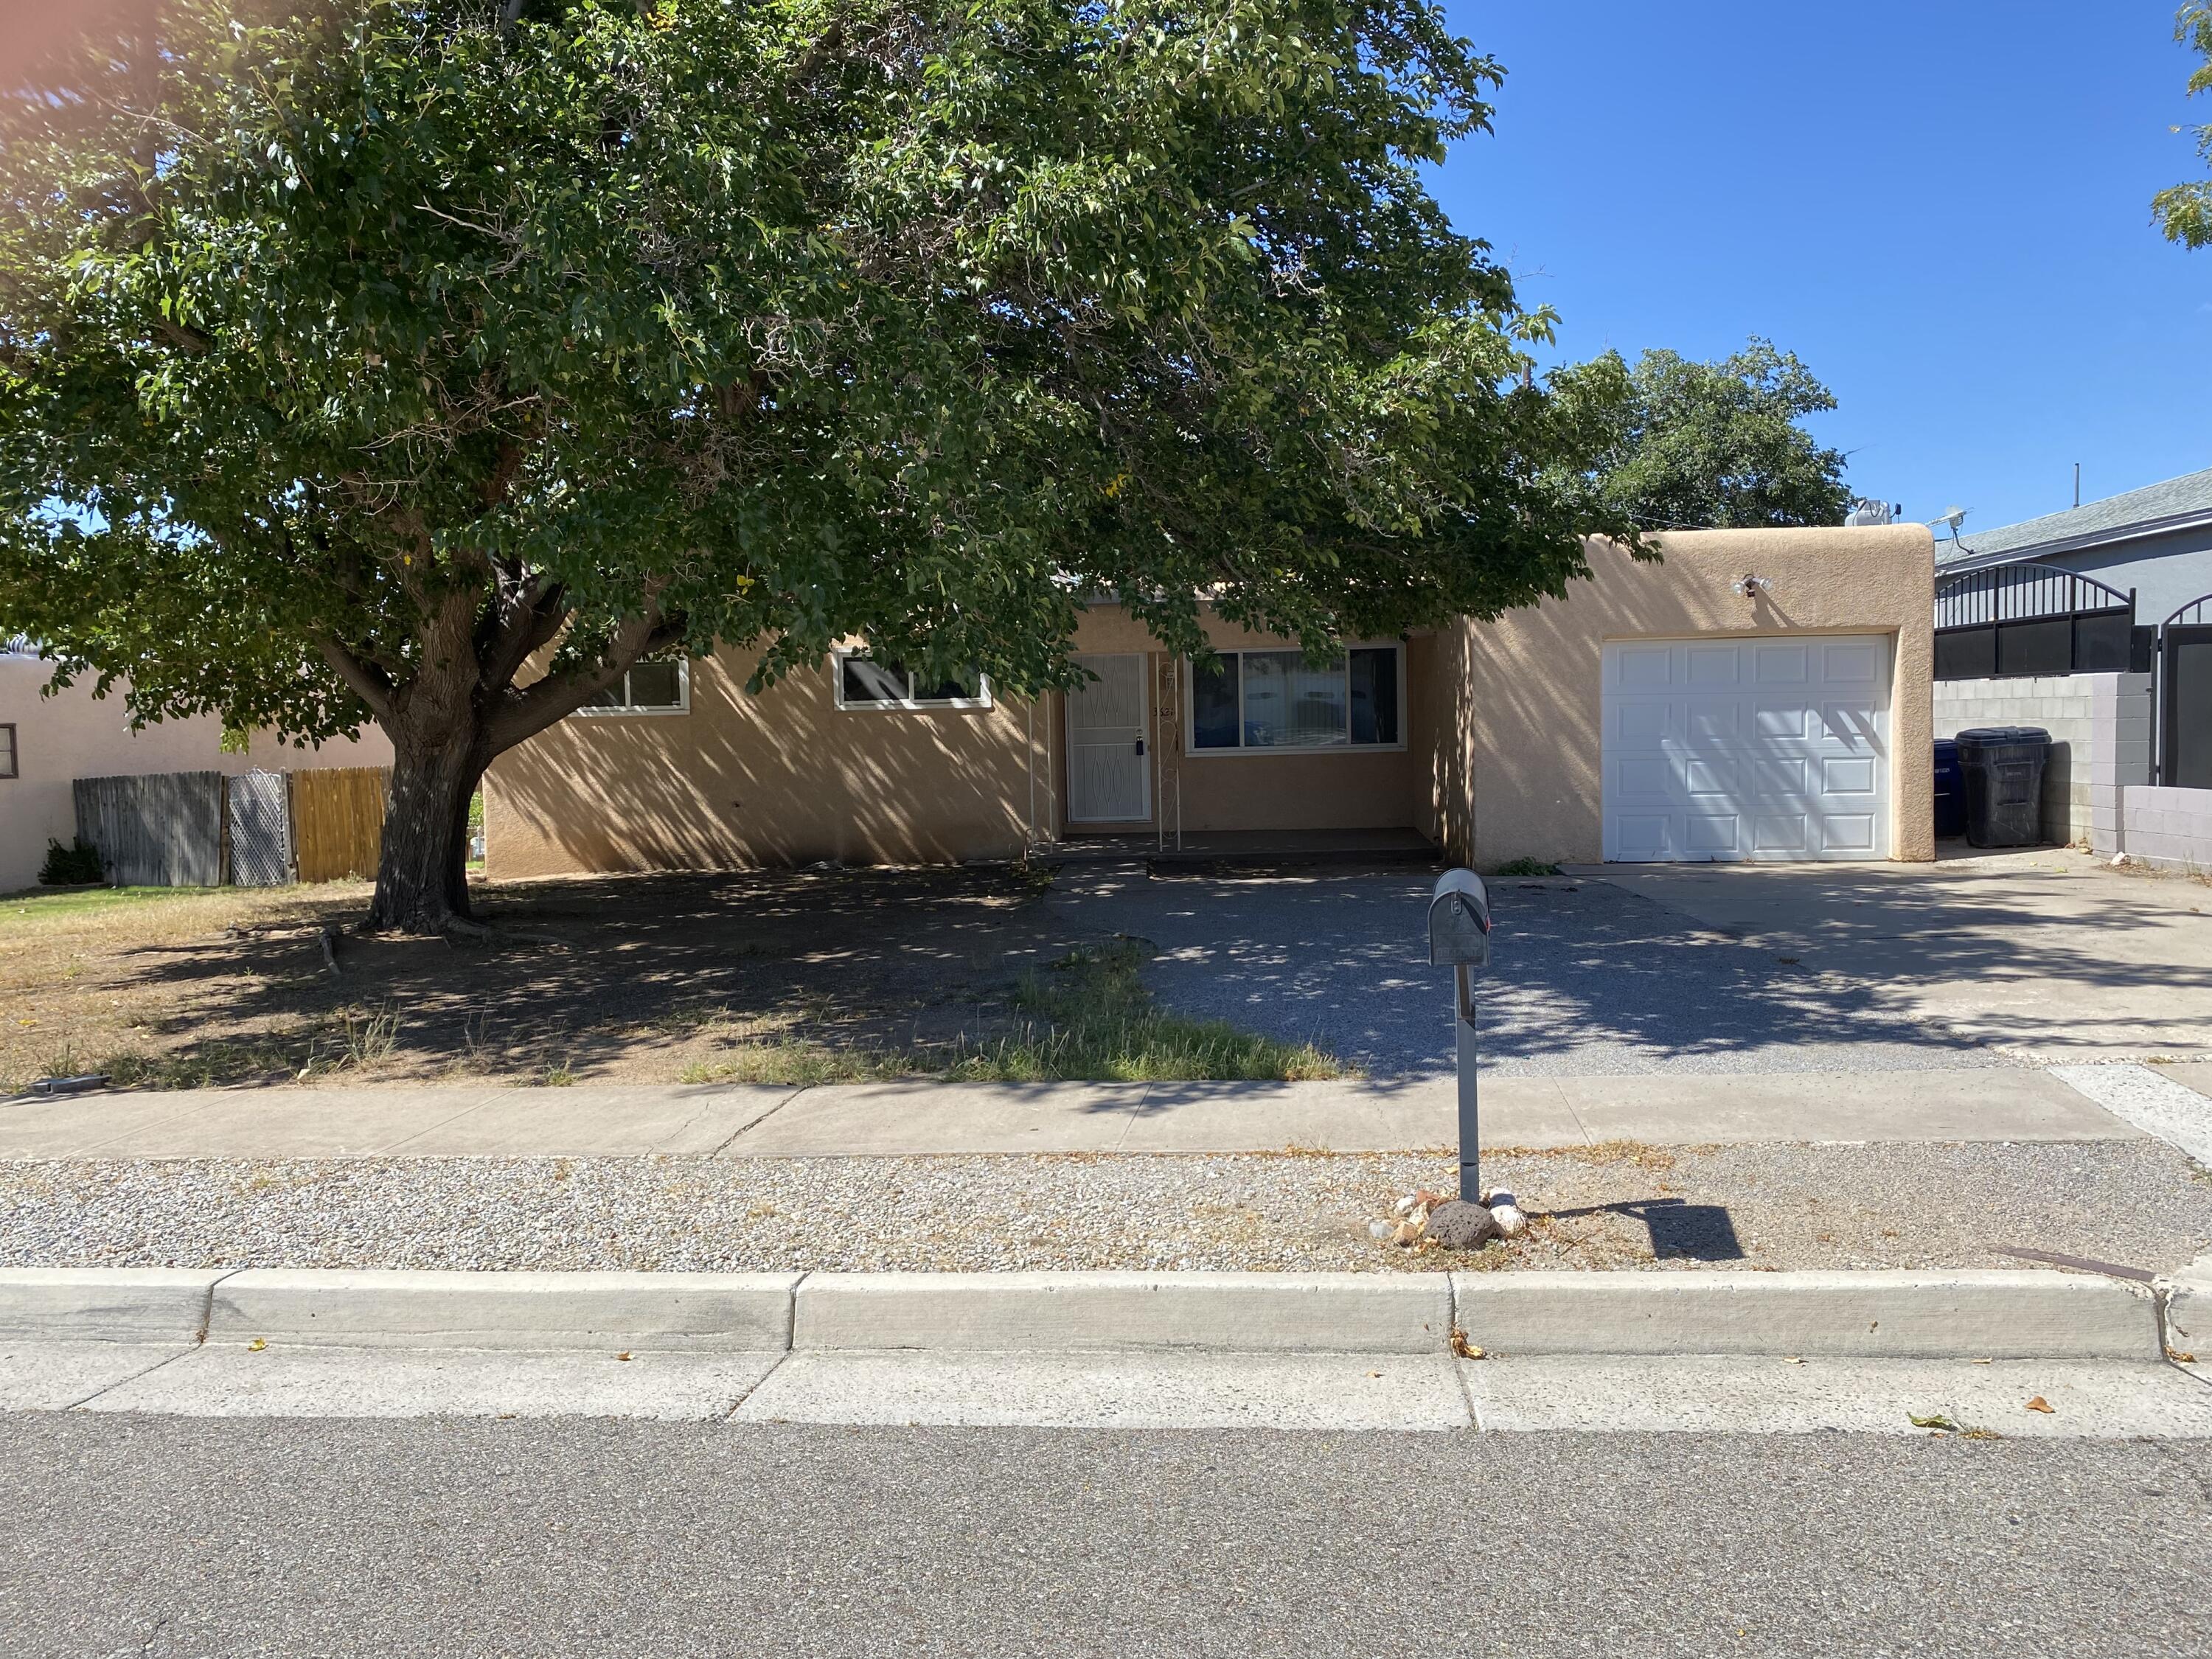 Fantastic Roberson home with hardwood floors, closet built ins and crawl space in NE Albuquerque.  You won't want to miss this 3 bedroom , 1 3/4 bath with a single car garage.  Formal living room, large kitchen which is open to the cozy den with fireplace.  Large walled backyard.